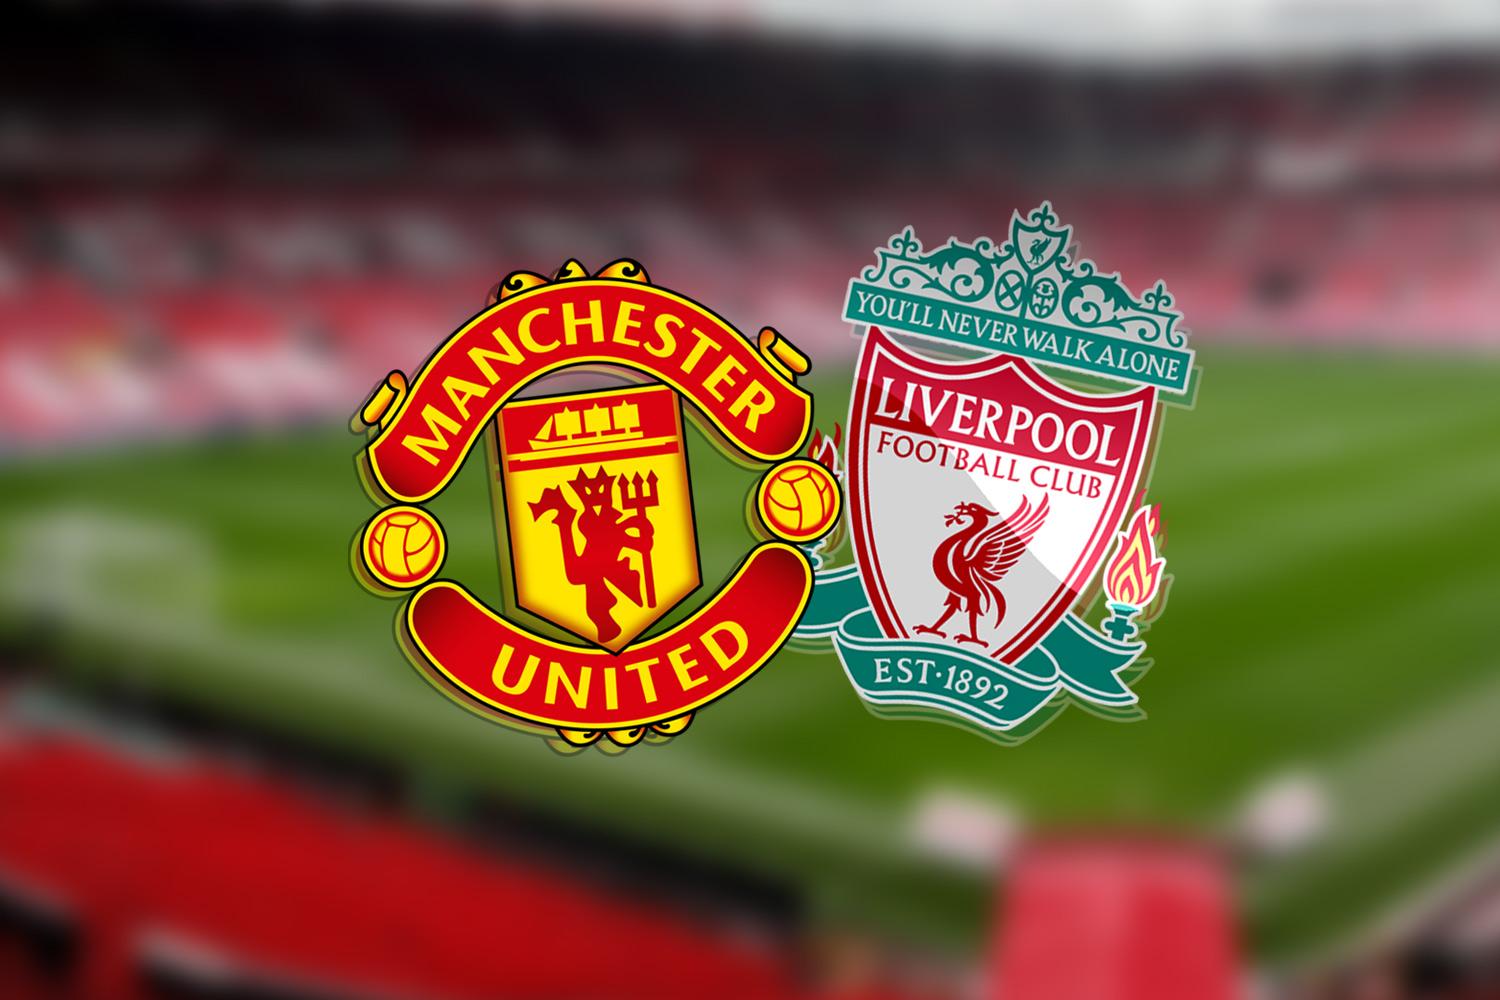 Man U, Liverpool And Others In Talks For A FIFA-backed £4.6bn European